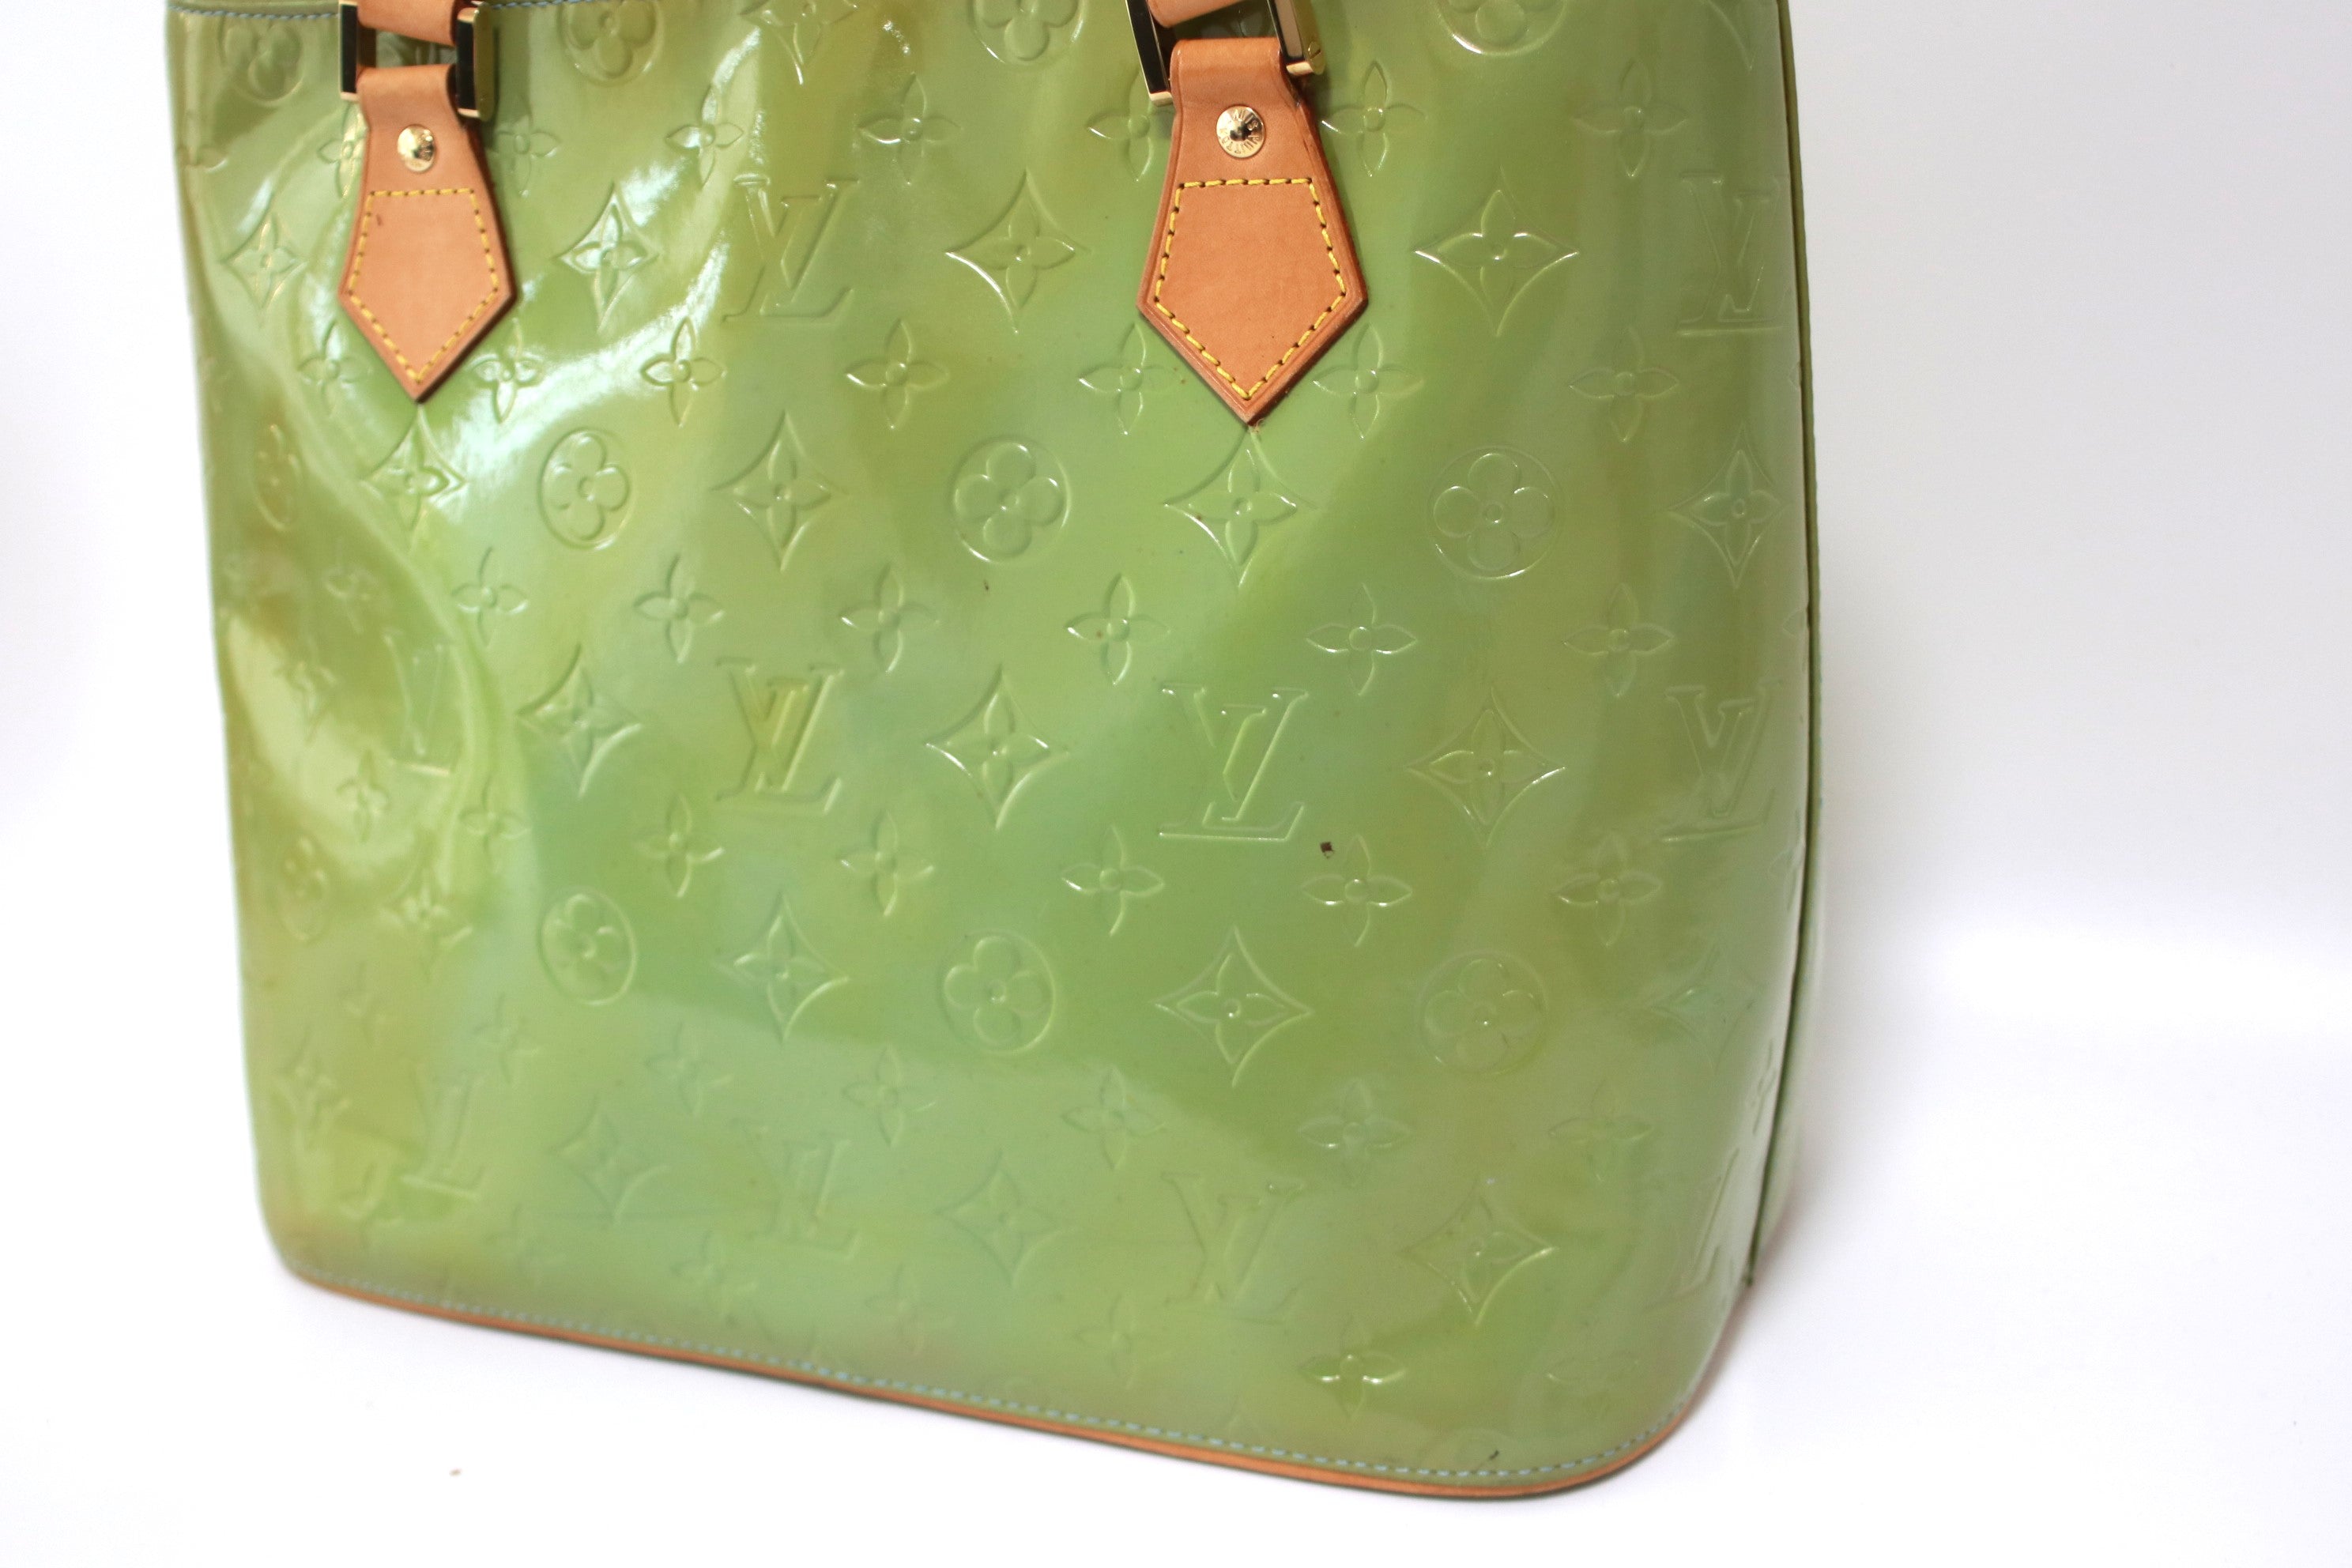 Louis Vuitton Houston Vernis Pepermint Green Bag Used (7225)